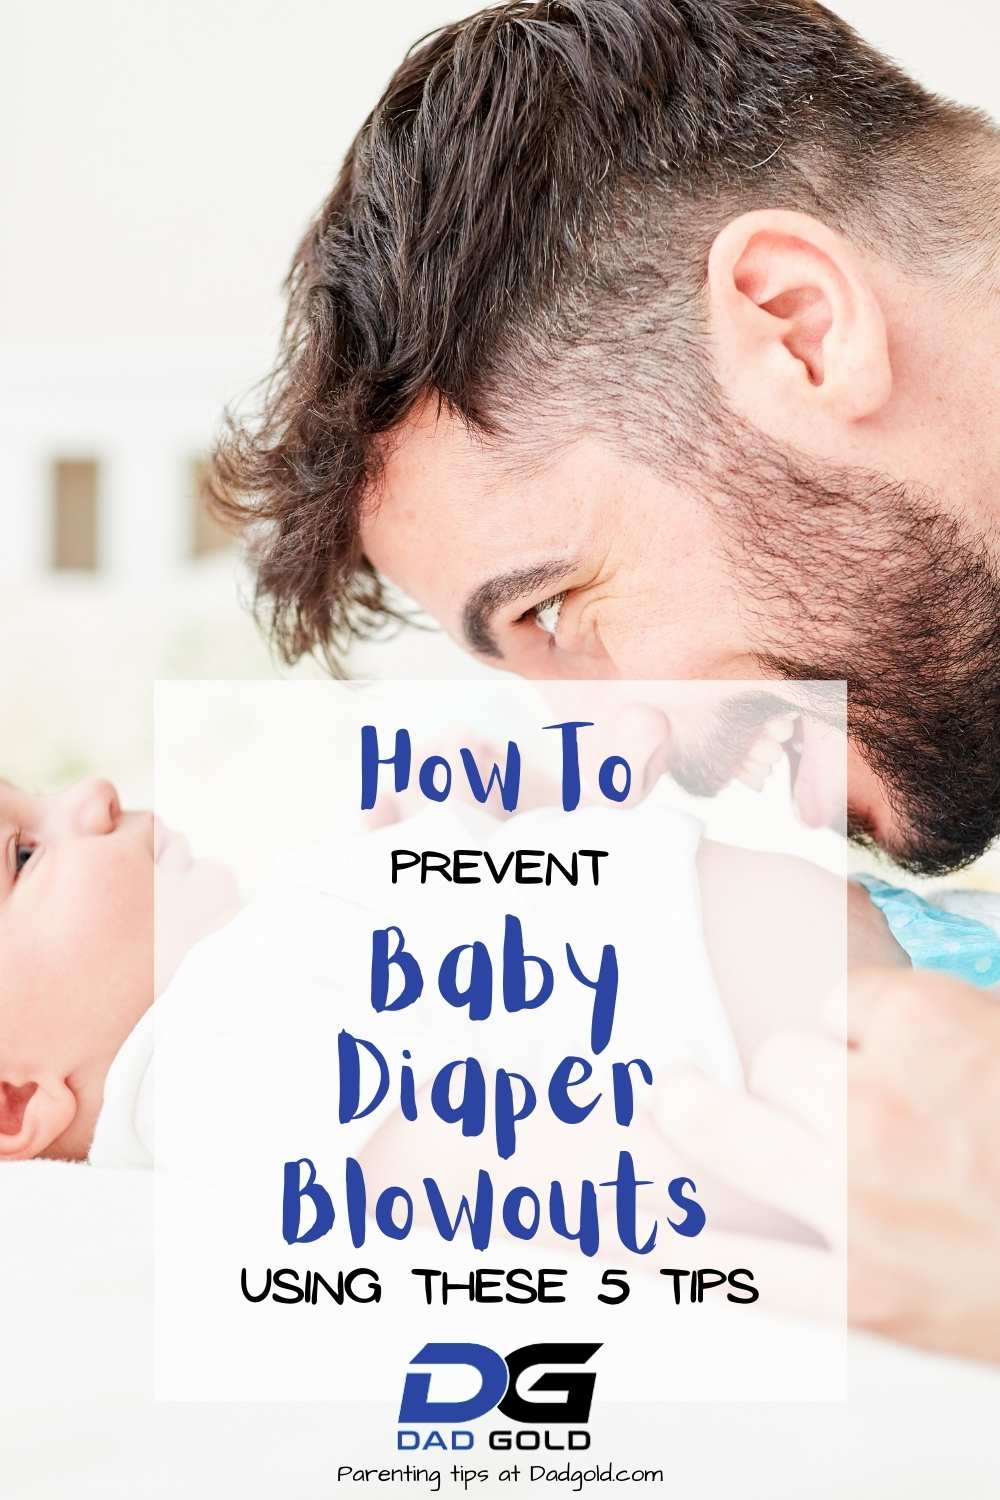 How To prevent baby diaper blowouts